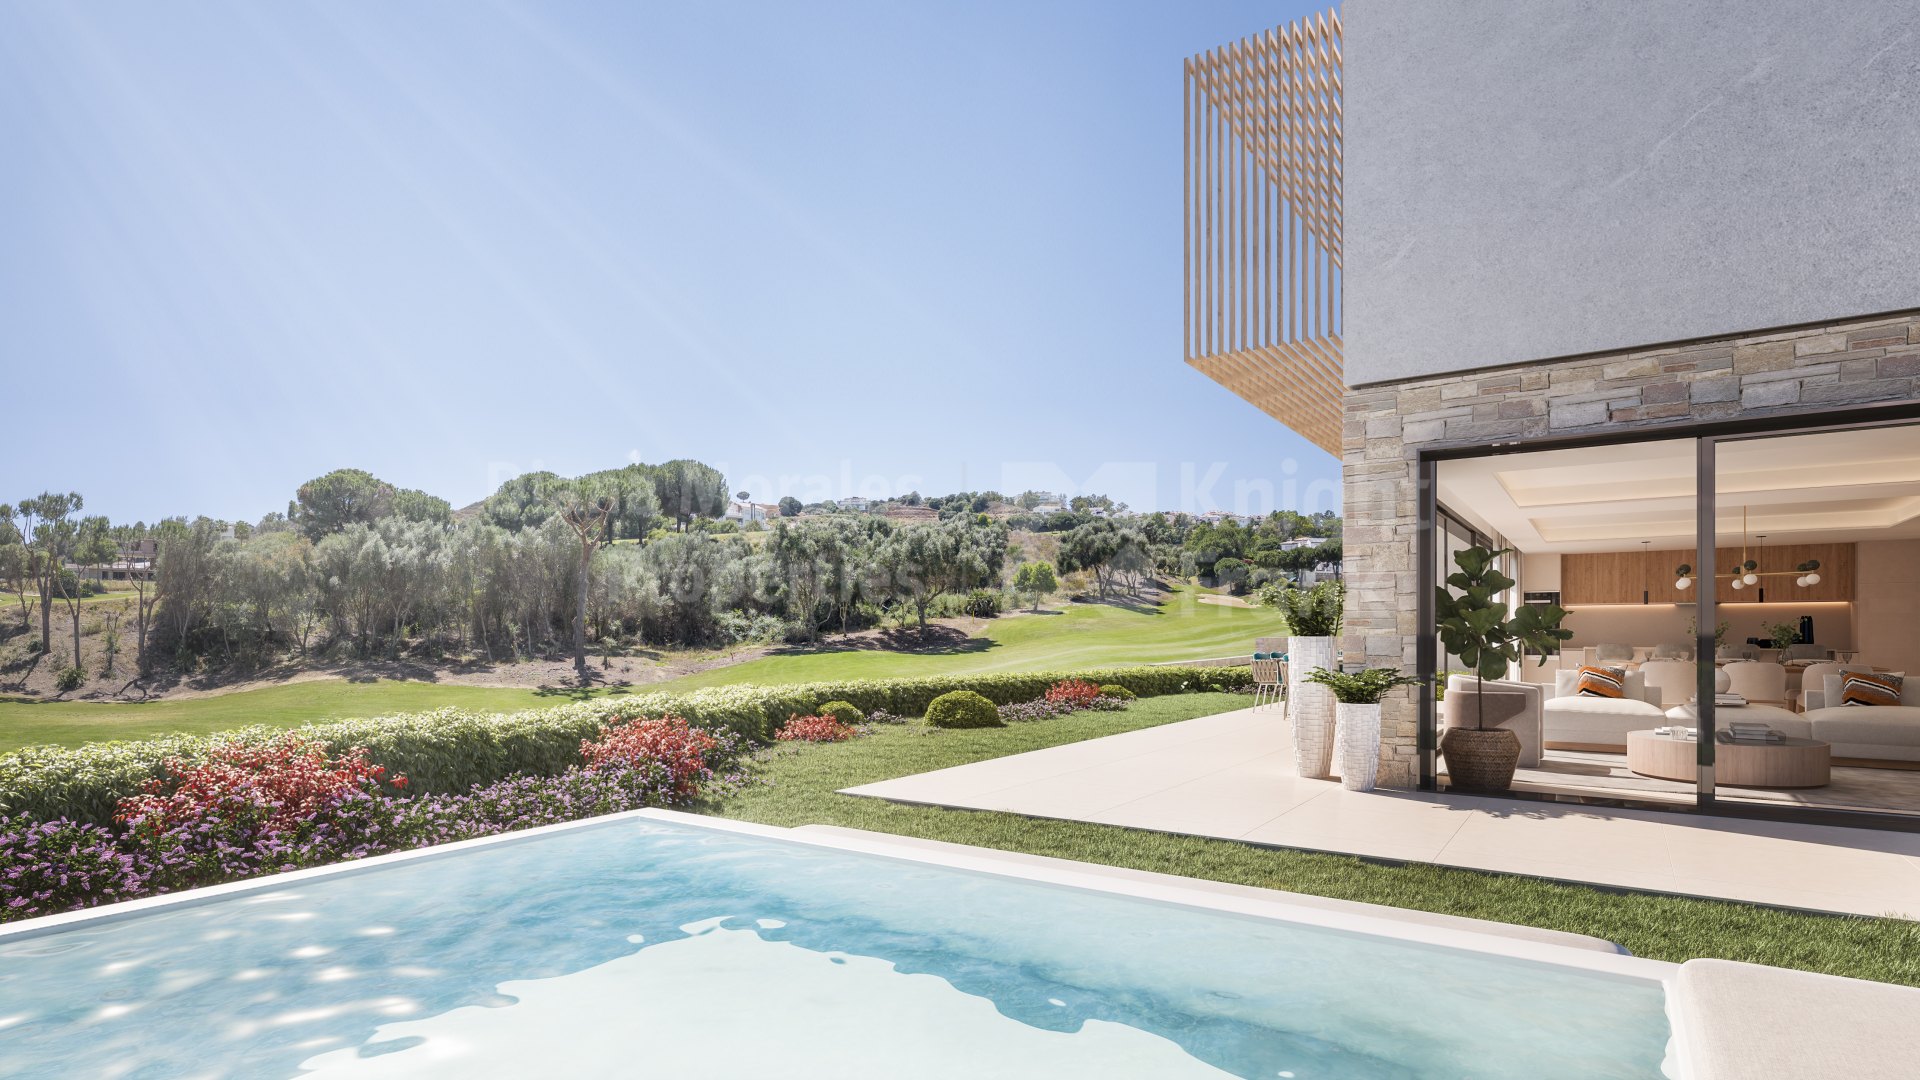 Cala de Mijas, New townhouse in front of the golf course